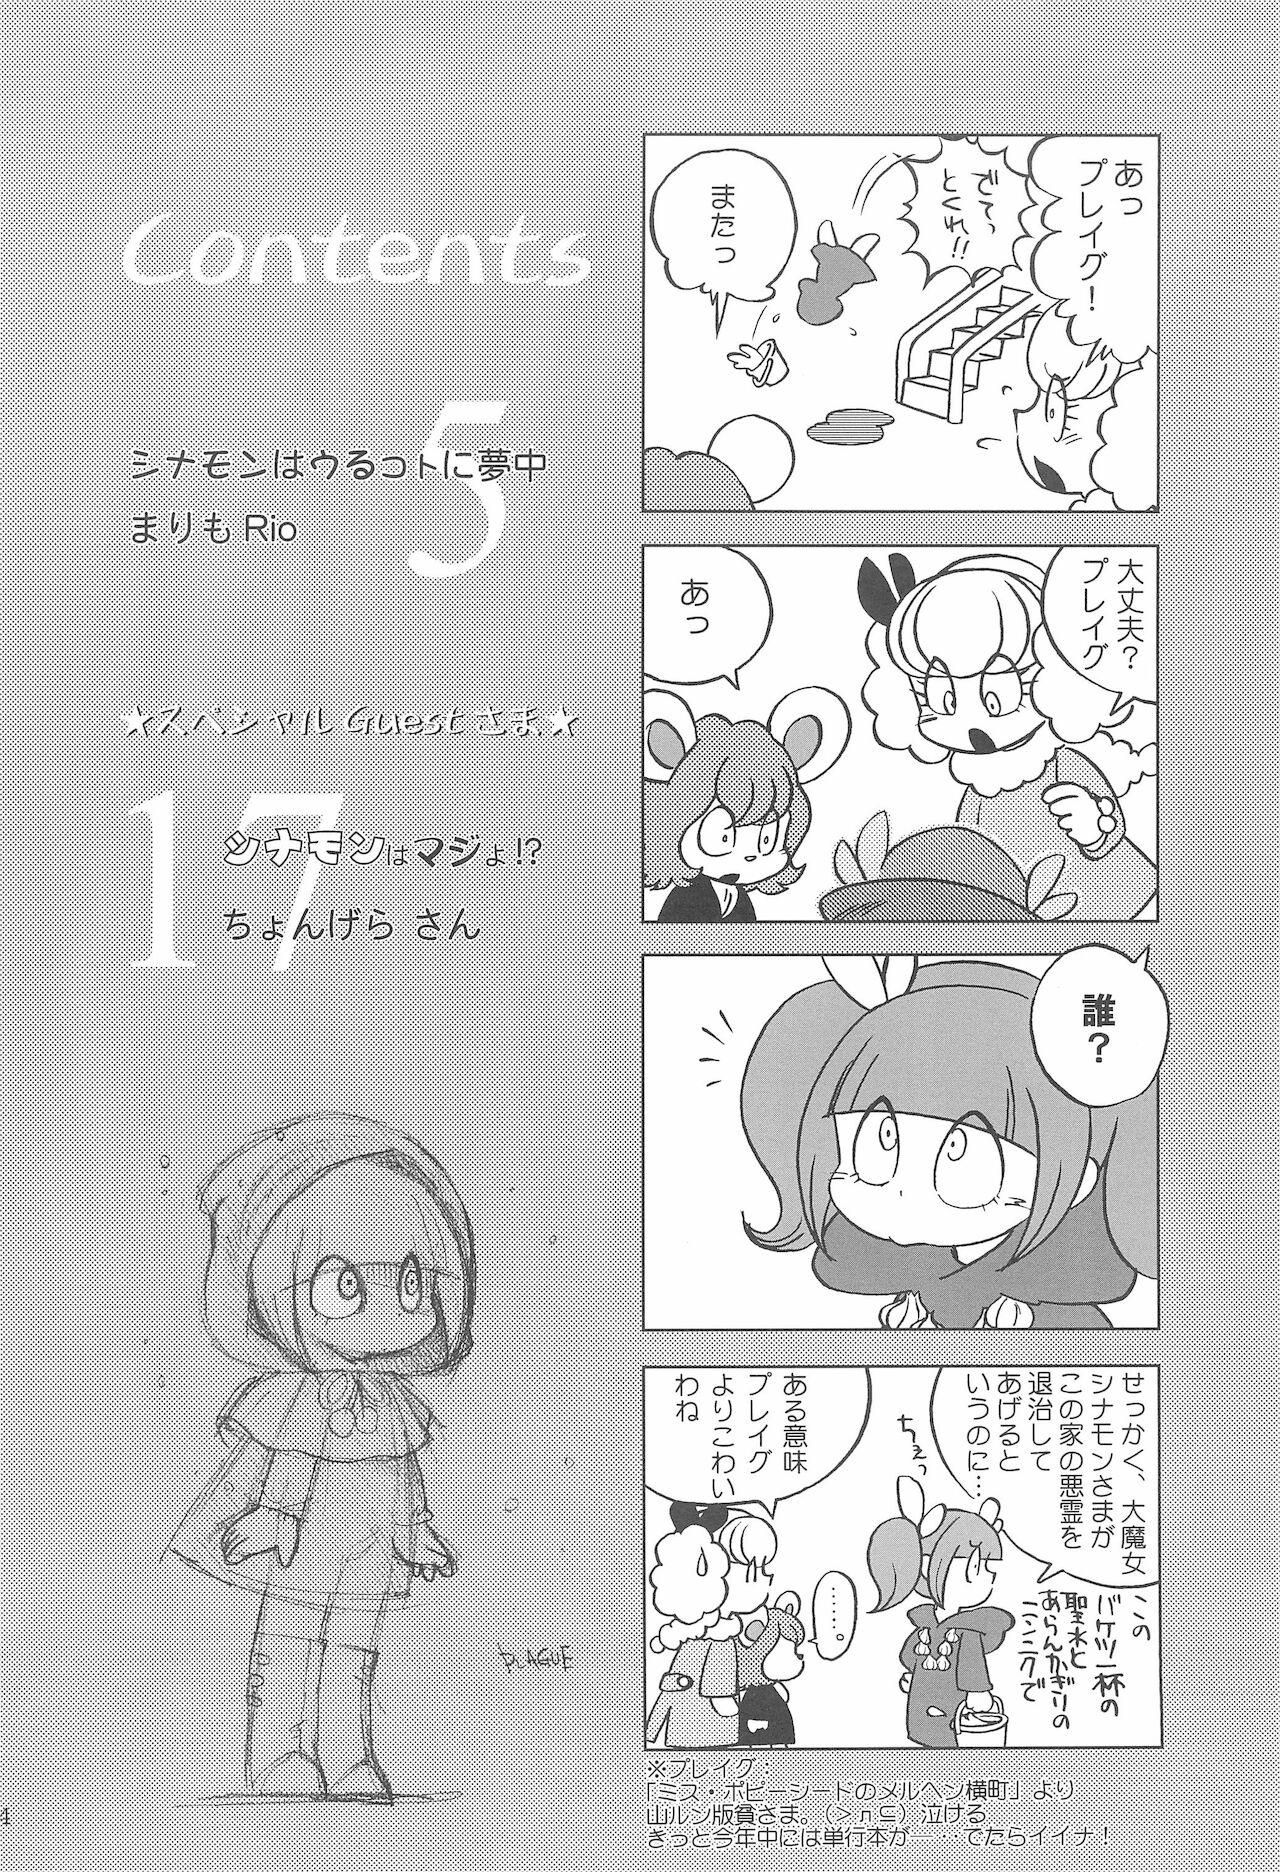 Sixtynine Cinnamon‐ist - The marshmallow times Doll - Page 4